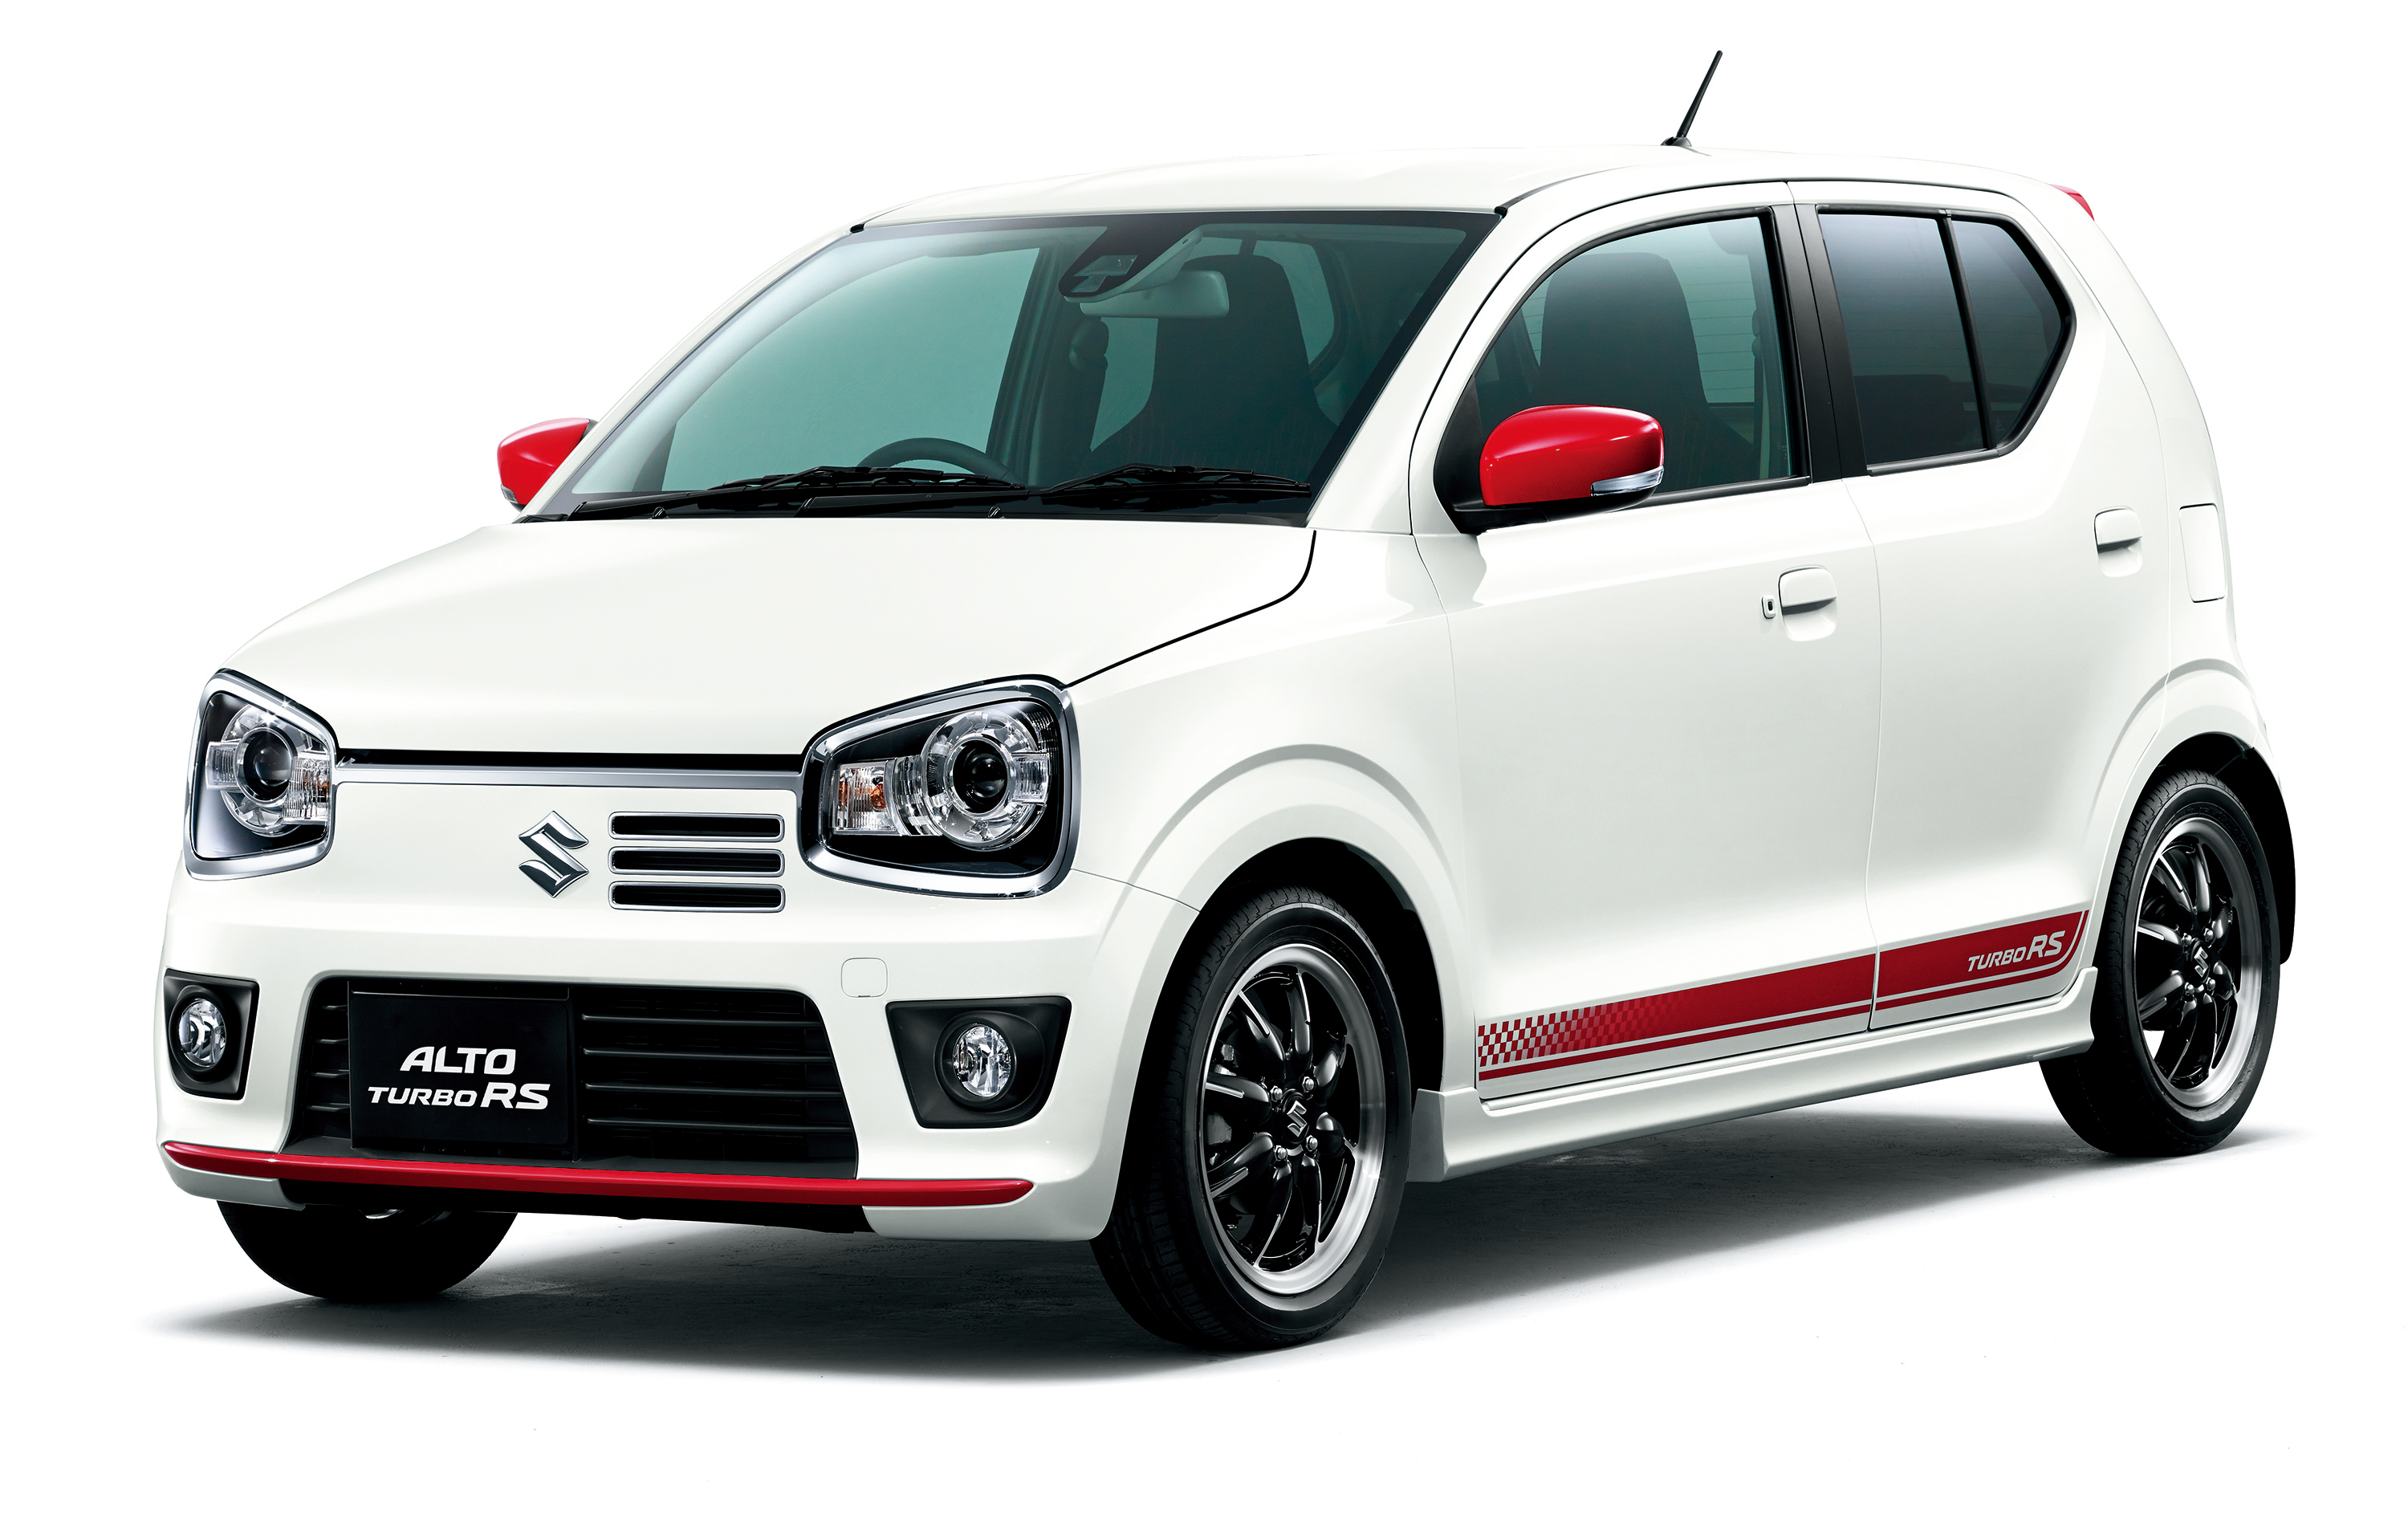 2015-suzuki-alto-turbo-rs-is-pocket-racer-from-japan-video-photo-gallery-93149_1.jpg